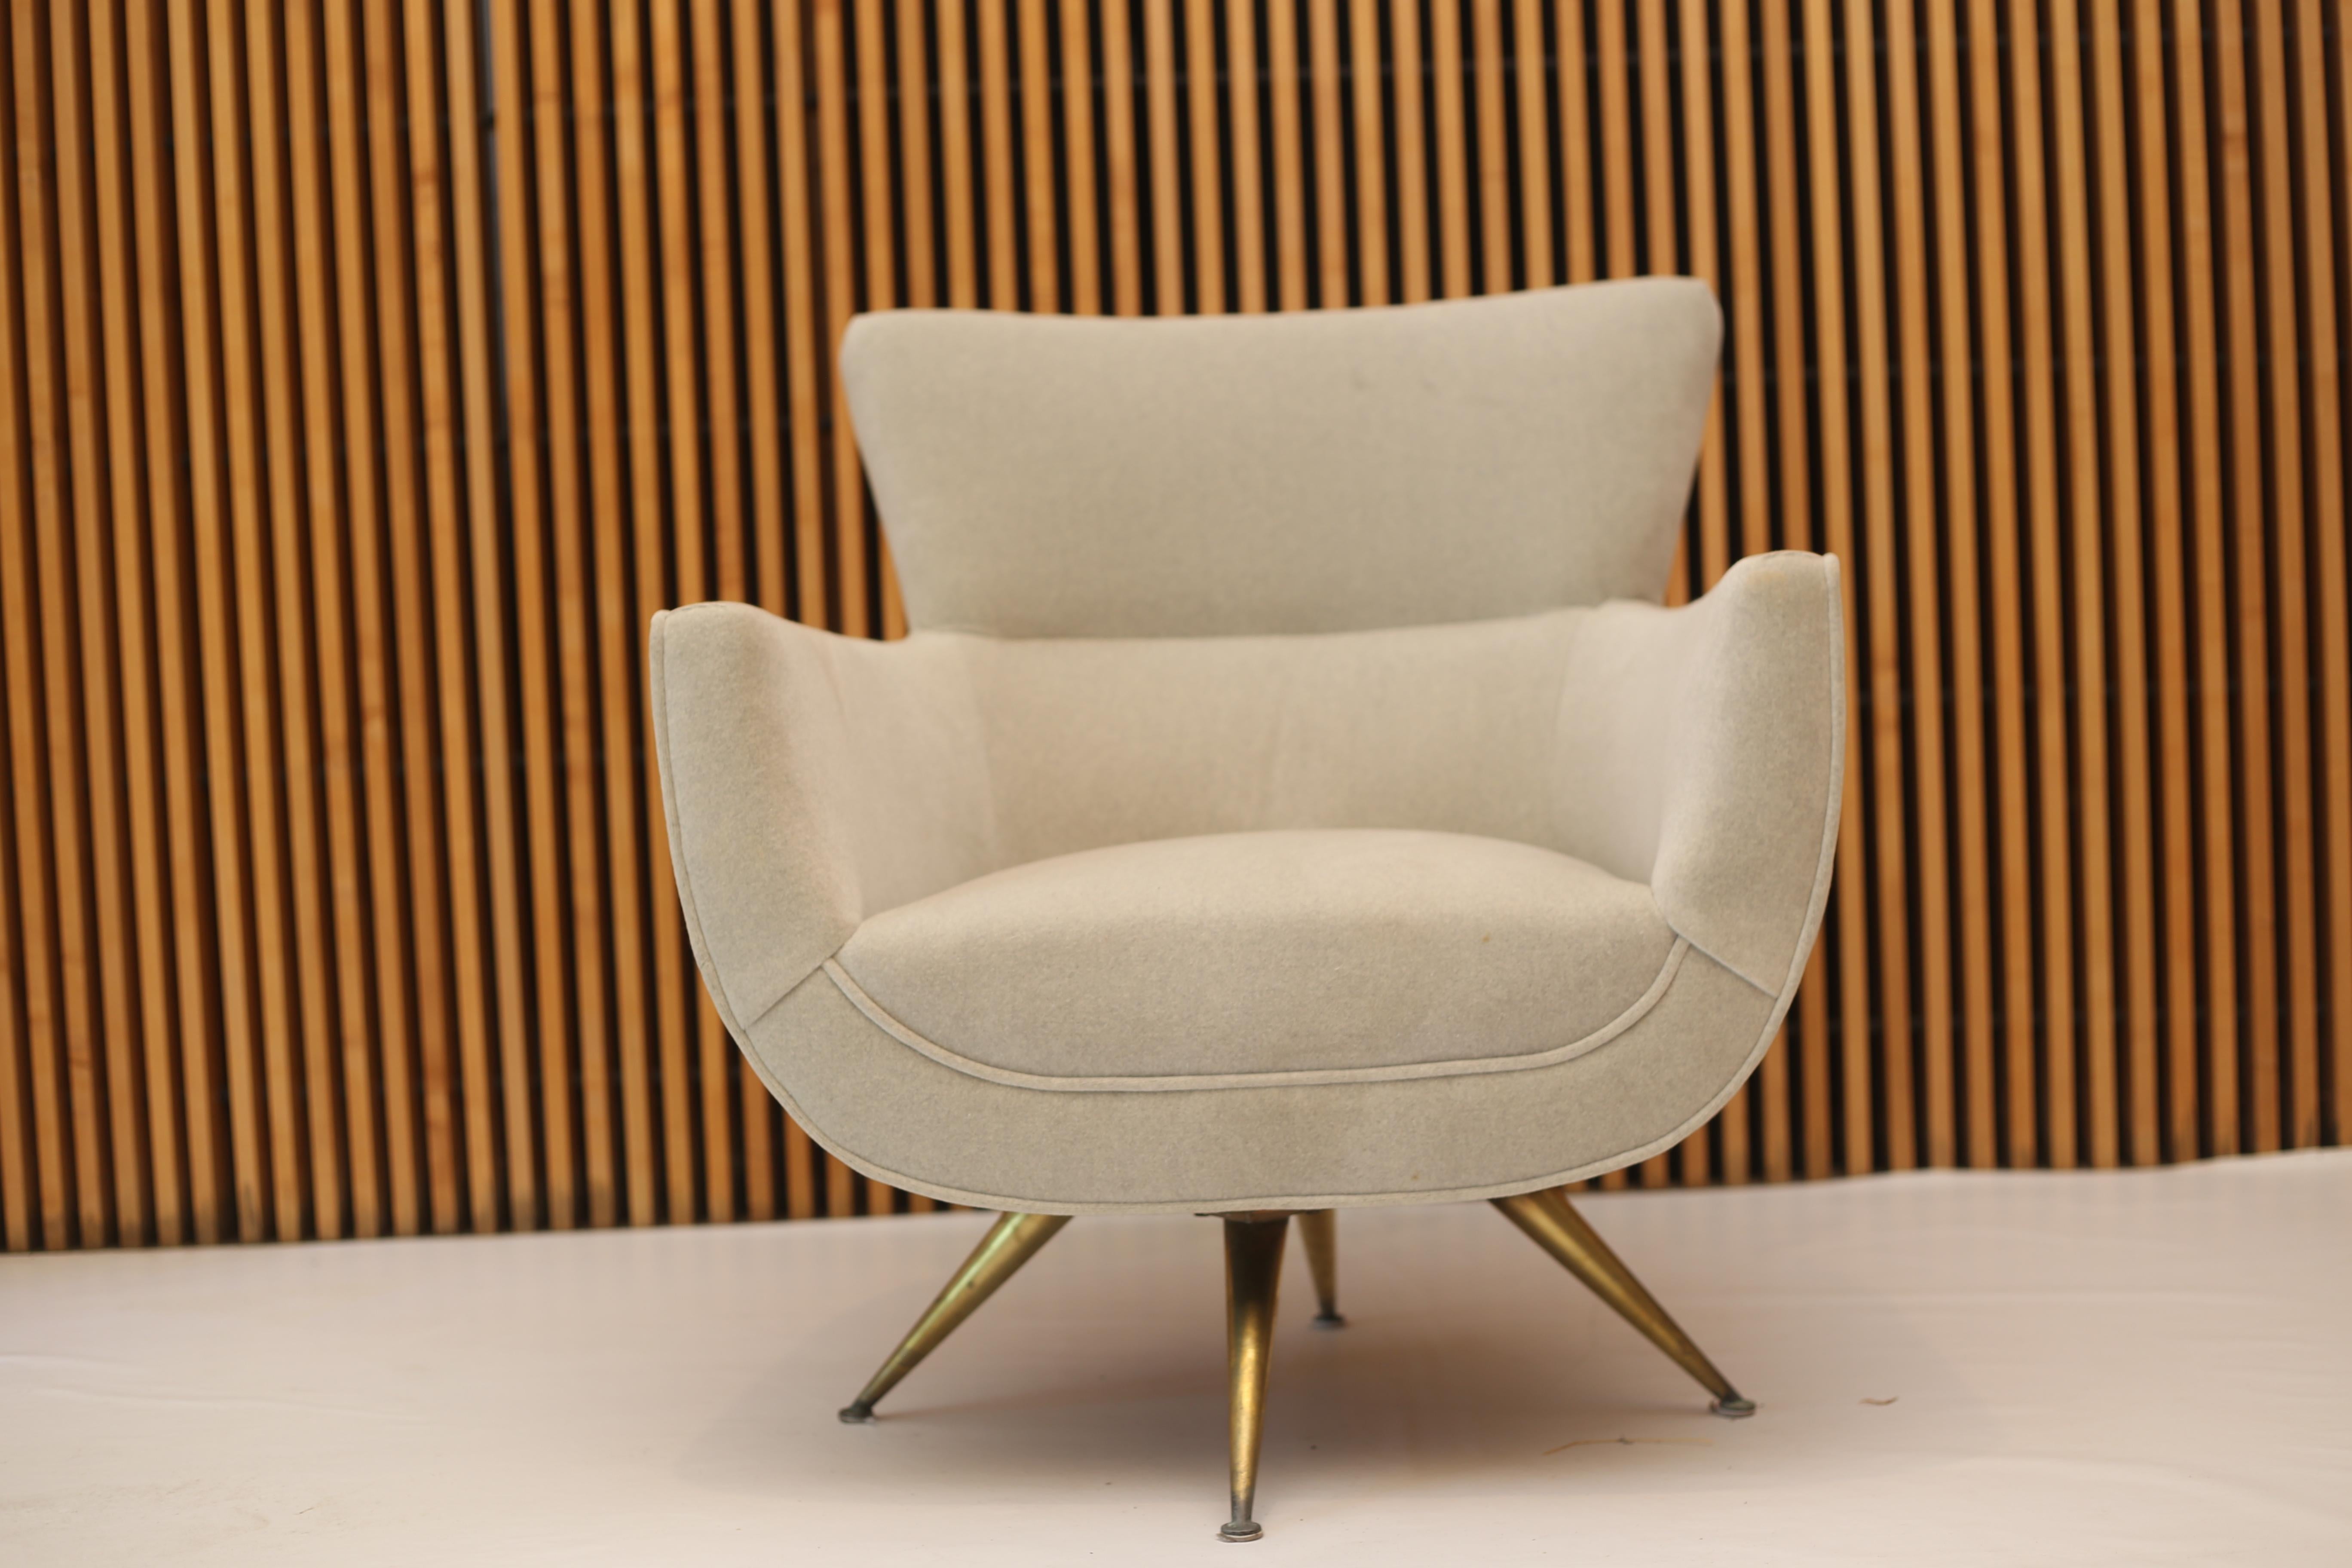 A rare example from Henry Glass for Forcast Furniture dating to the mid-1950s. Reupholstered in a neutral velvet fabric and on a swivel base with splayed brass legs.